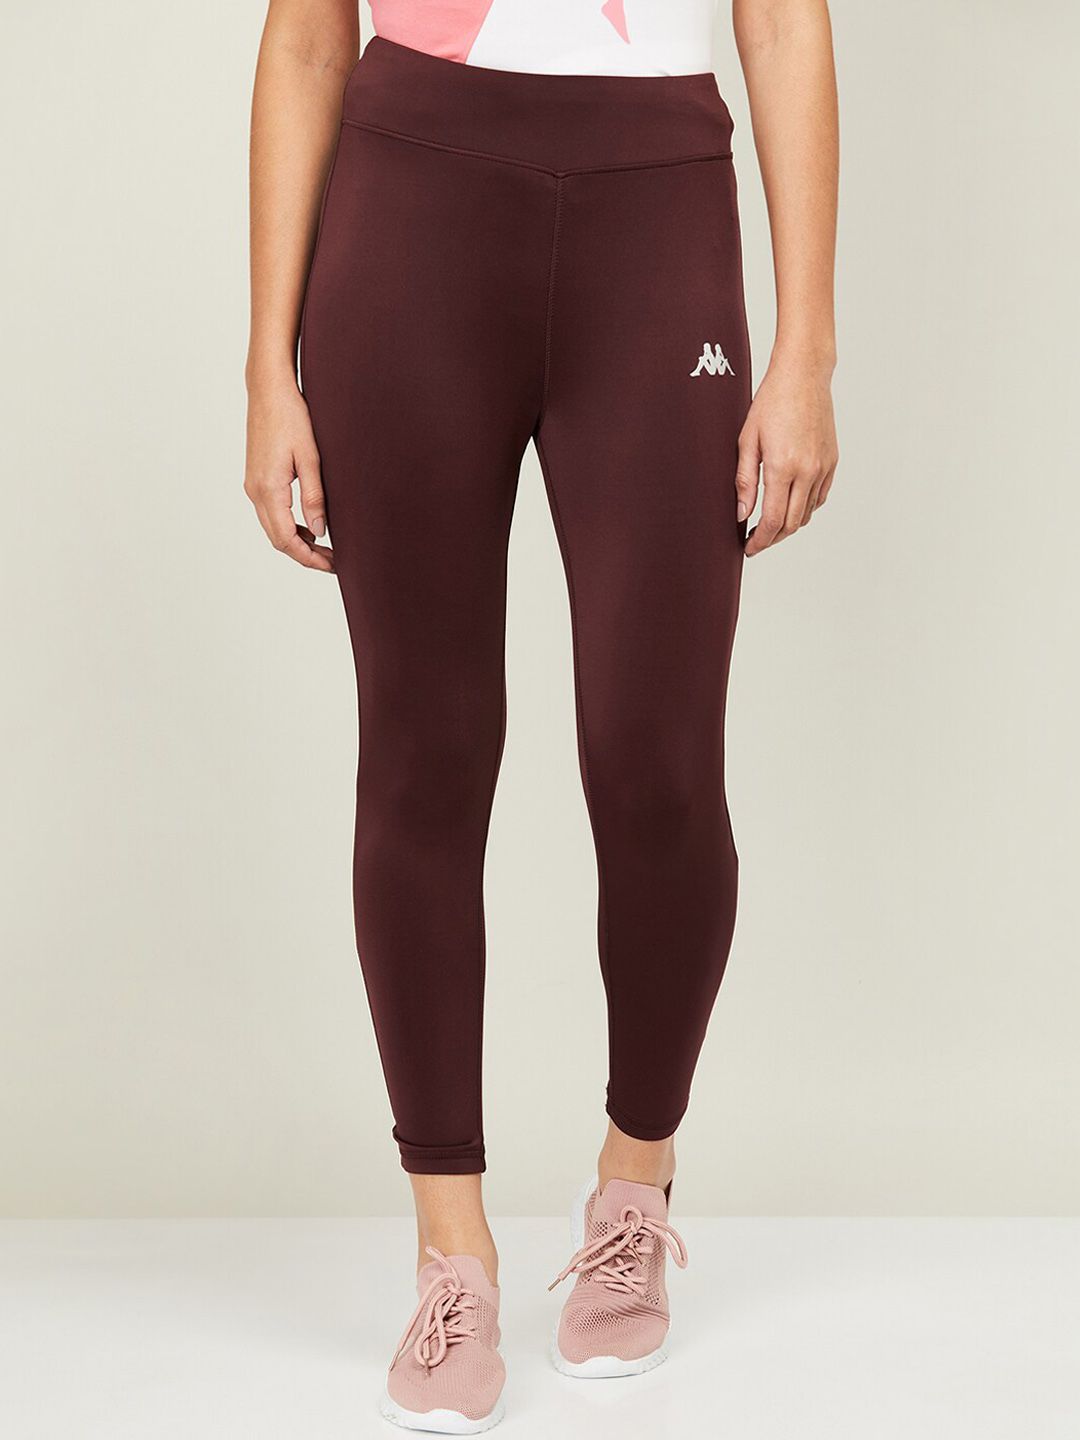 Kappa Women Maroon Solid Tights Price in India